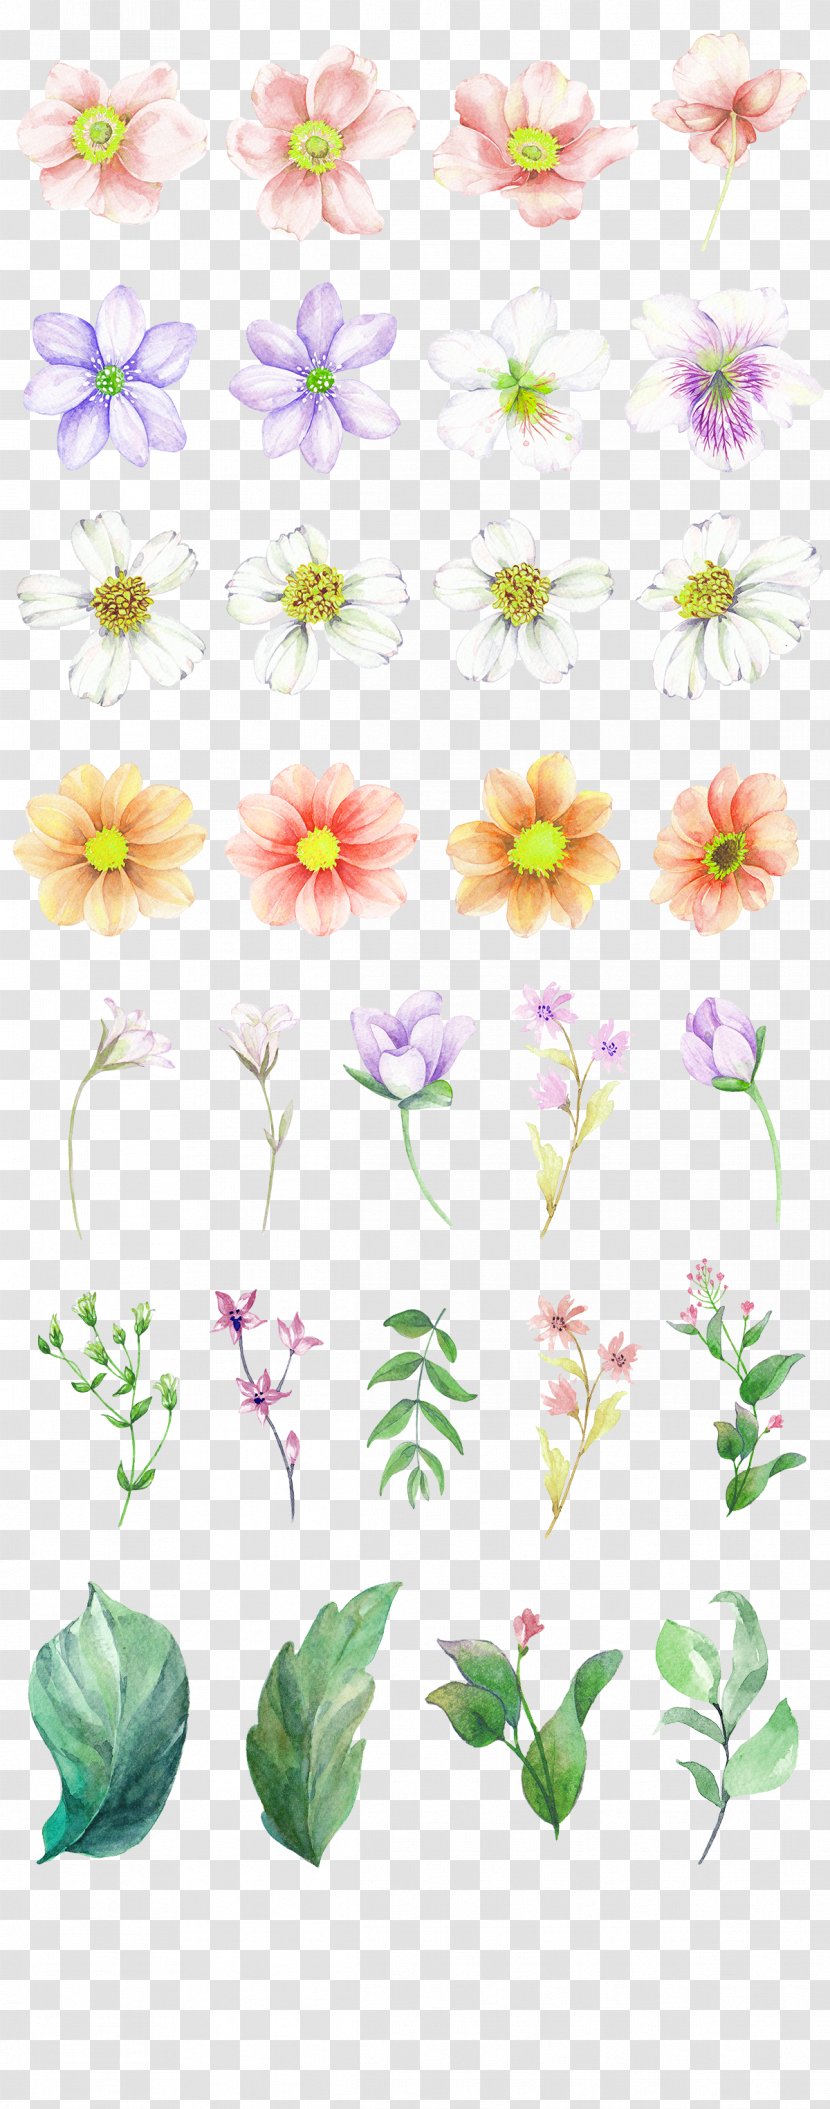 Watercolor Painting Drawing Download - Gratis - White Dream Garden Flowers Decorative Patterns Transparent PNG